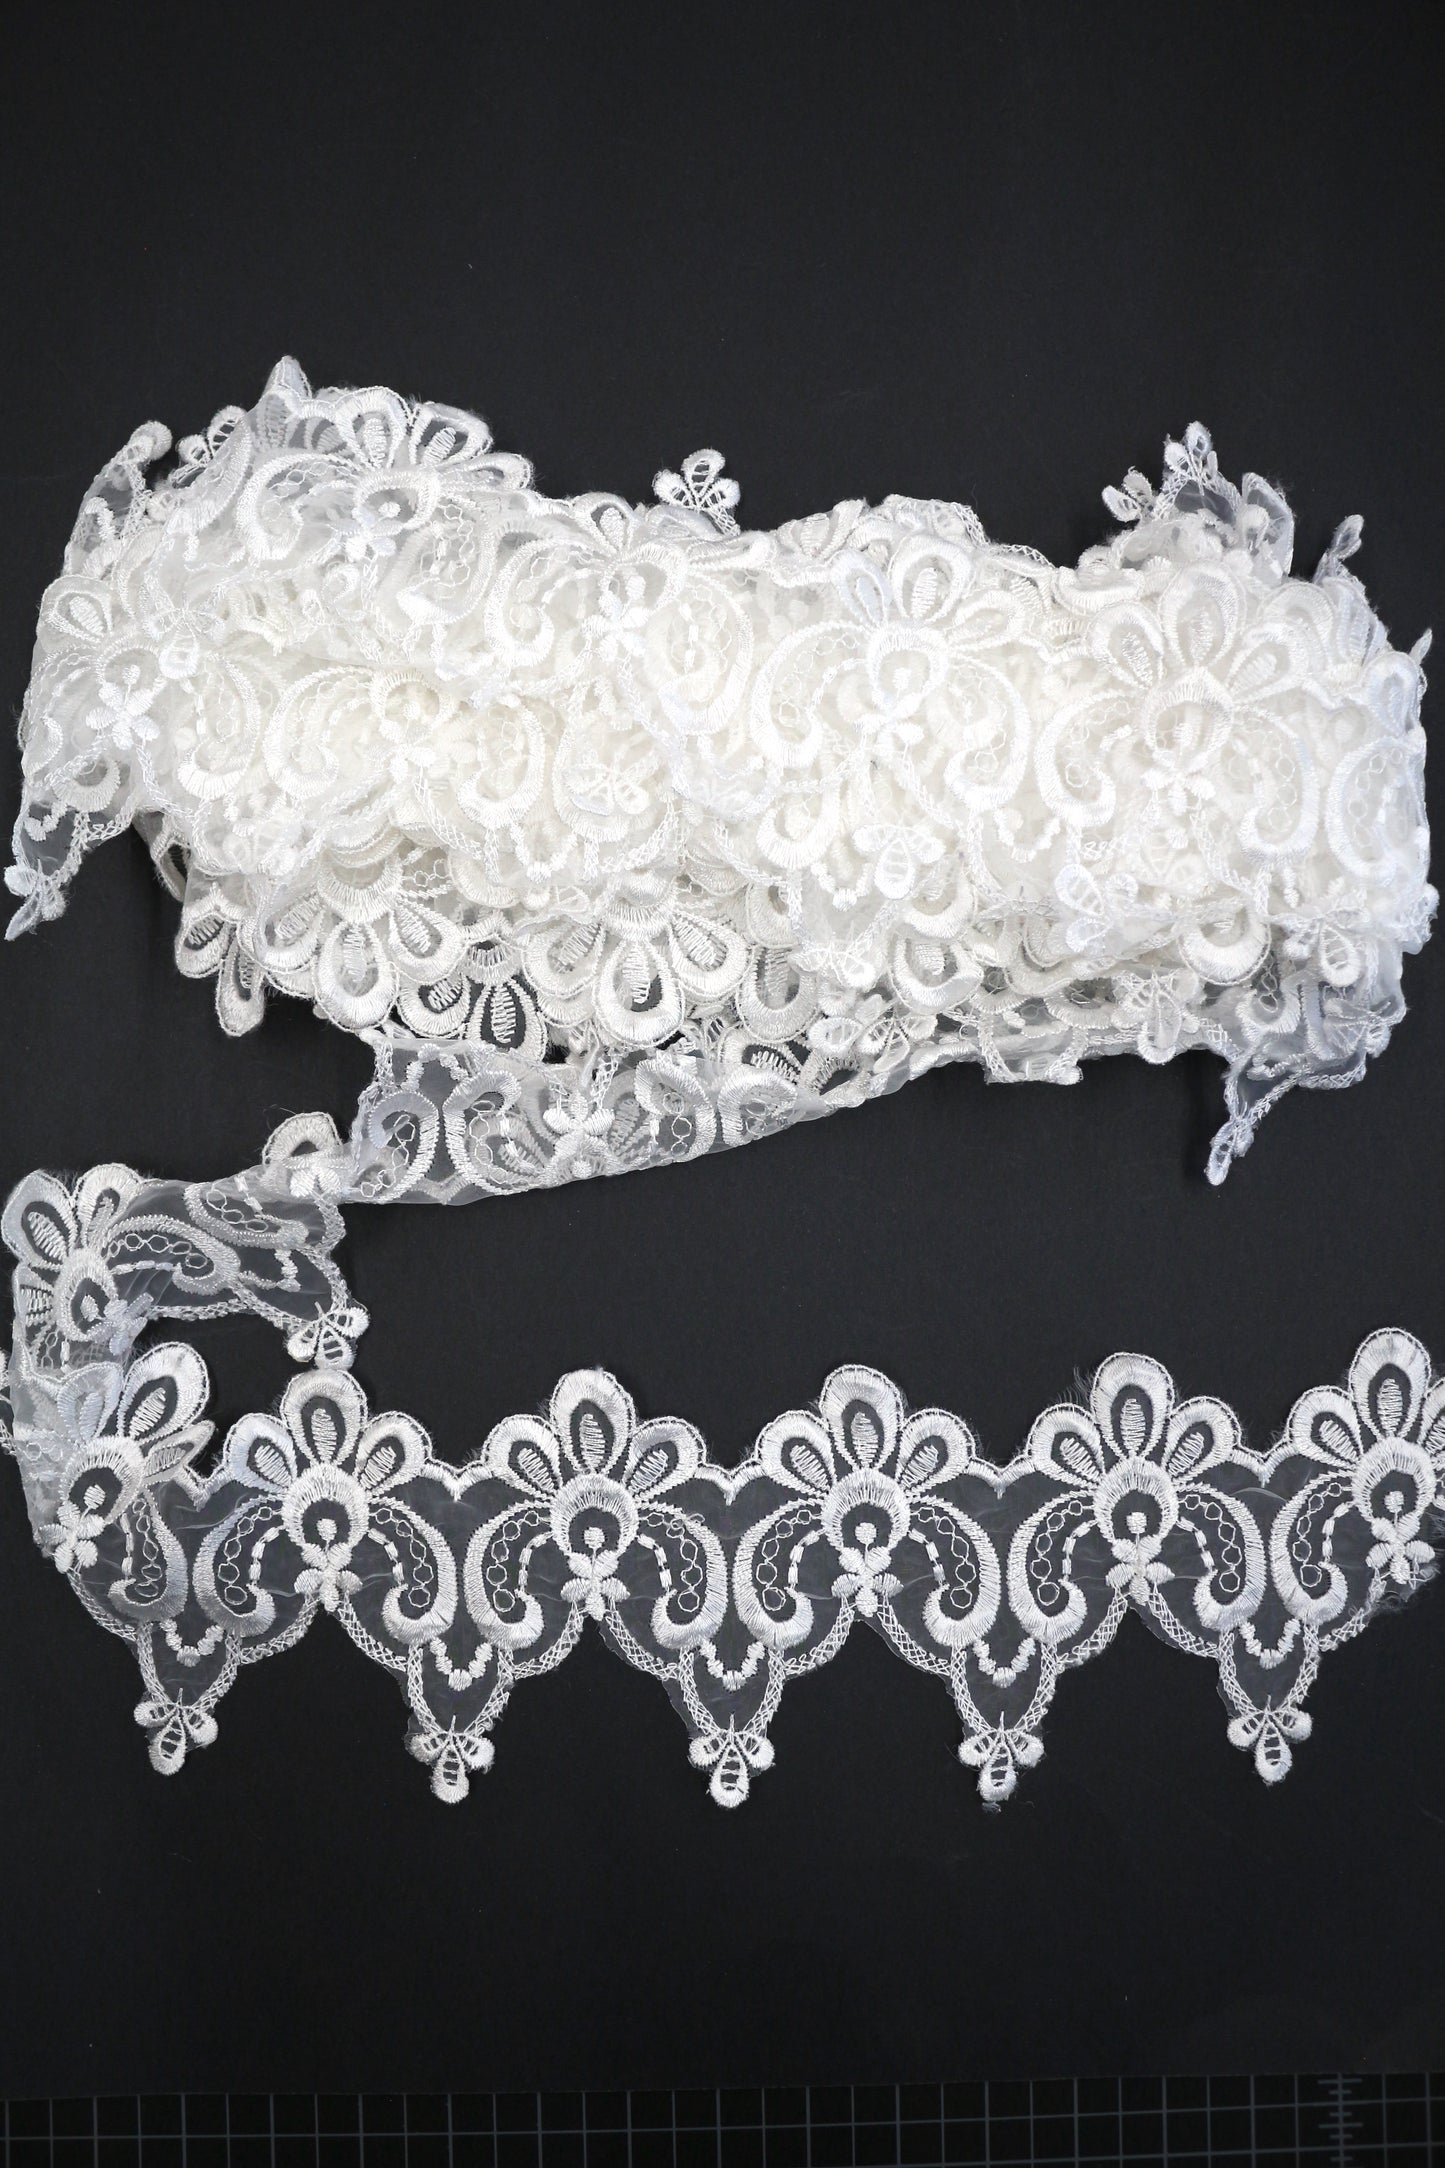 5" White Detailed Lace Sewing Trim